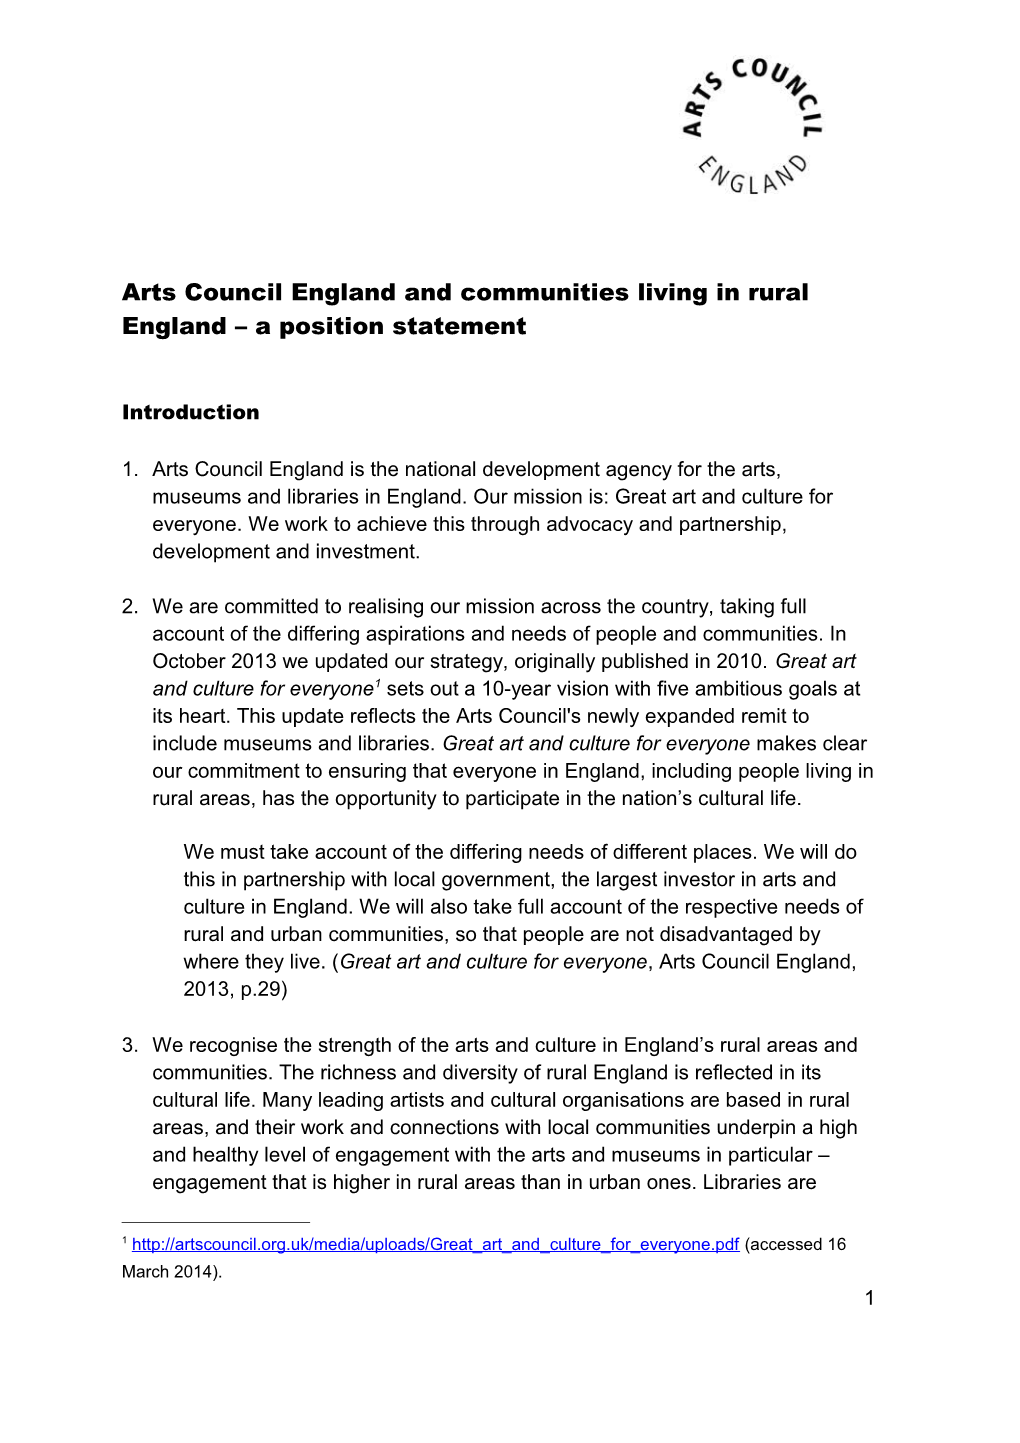 Arts Council England and Communities Living in Rural England a Position Statement